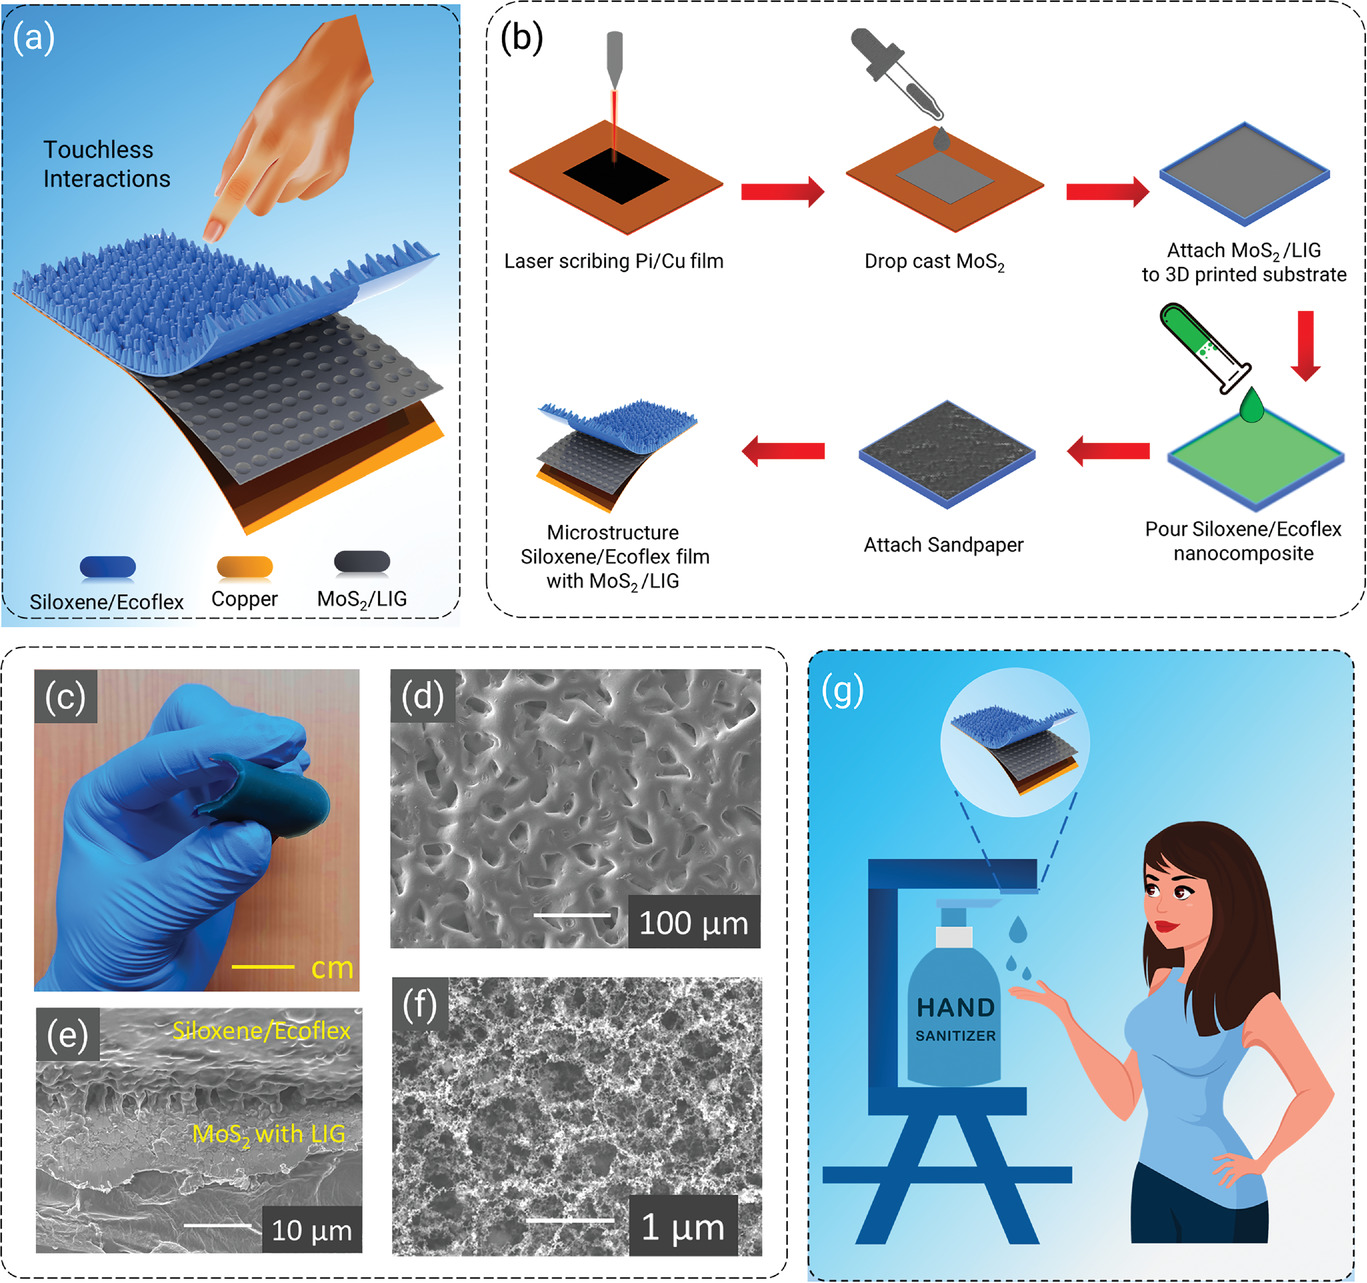 A Siloxene/Ecoflex Nanocomposite-Based Triboelectric Nanogenerator with Enhanced Charge Retention by MoS2/LIG for Self-Powered Touchless Sensor Applications